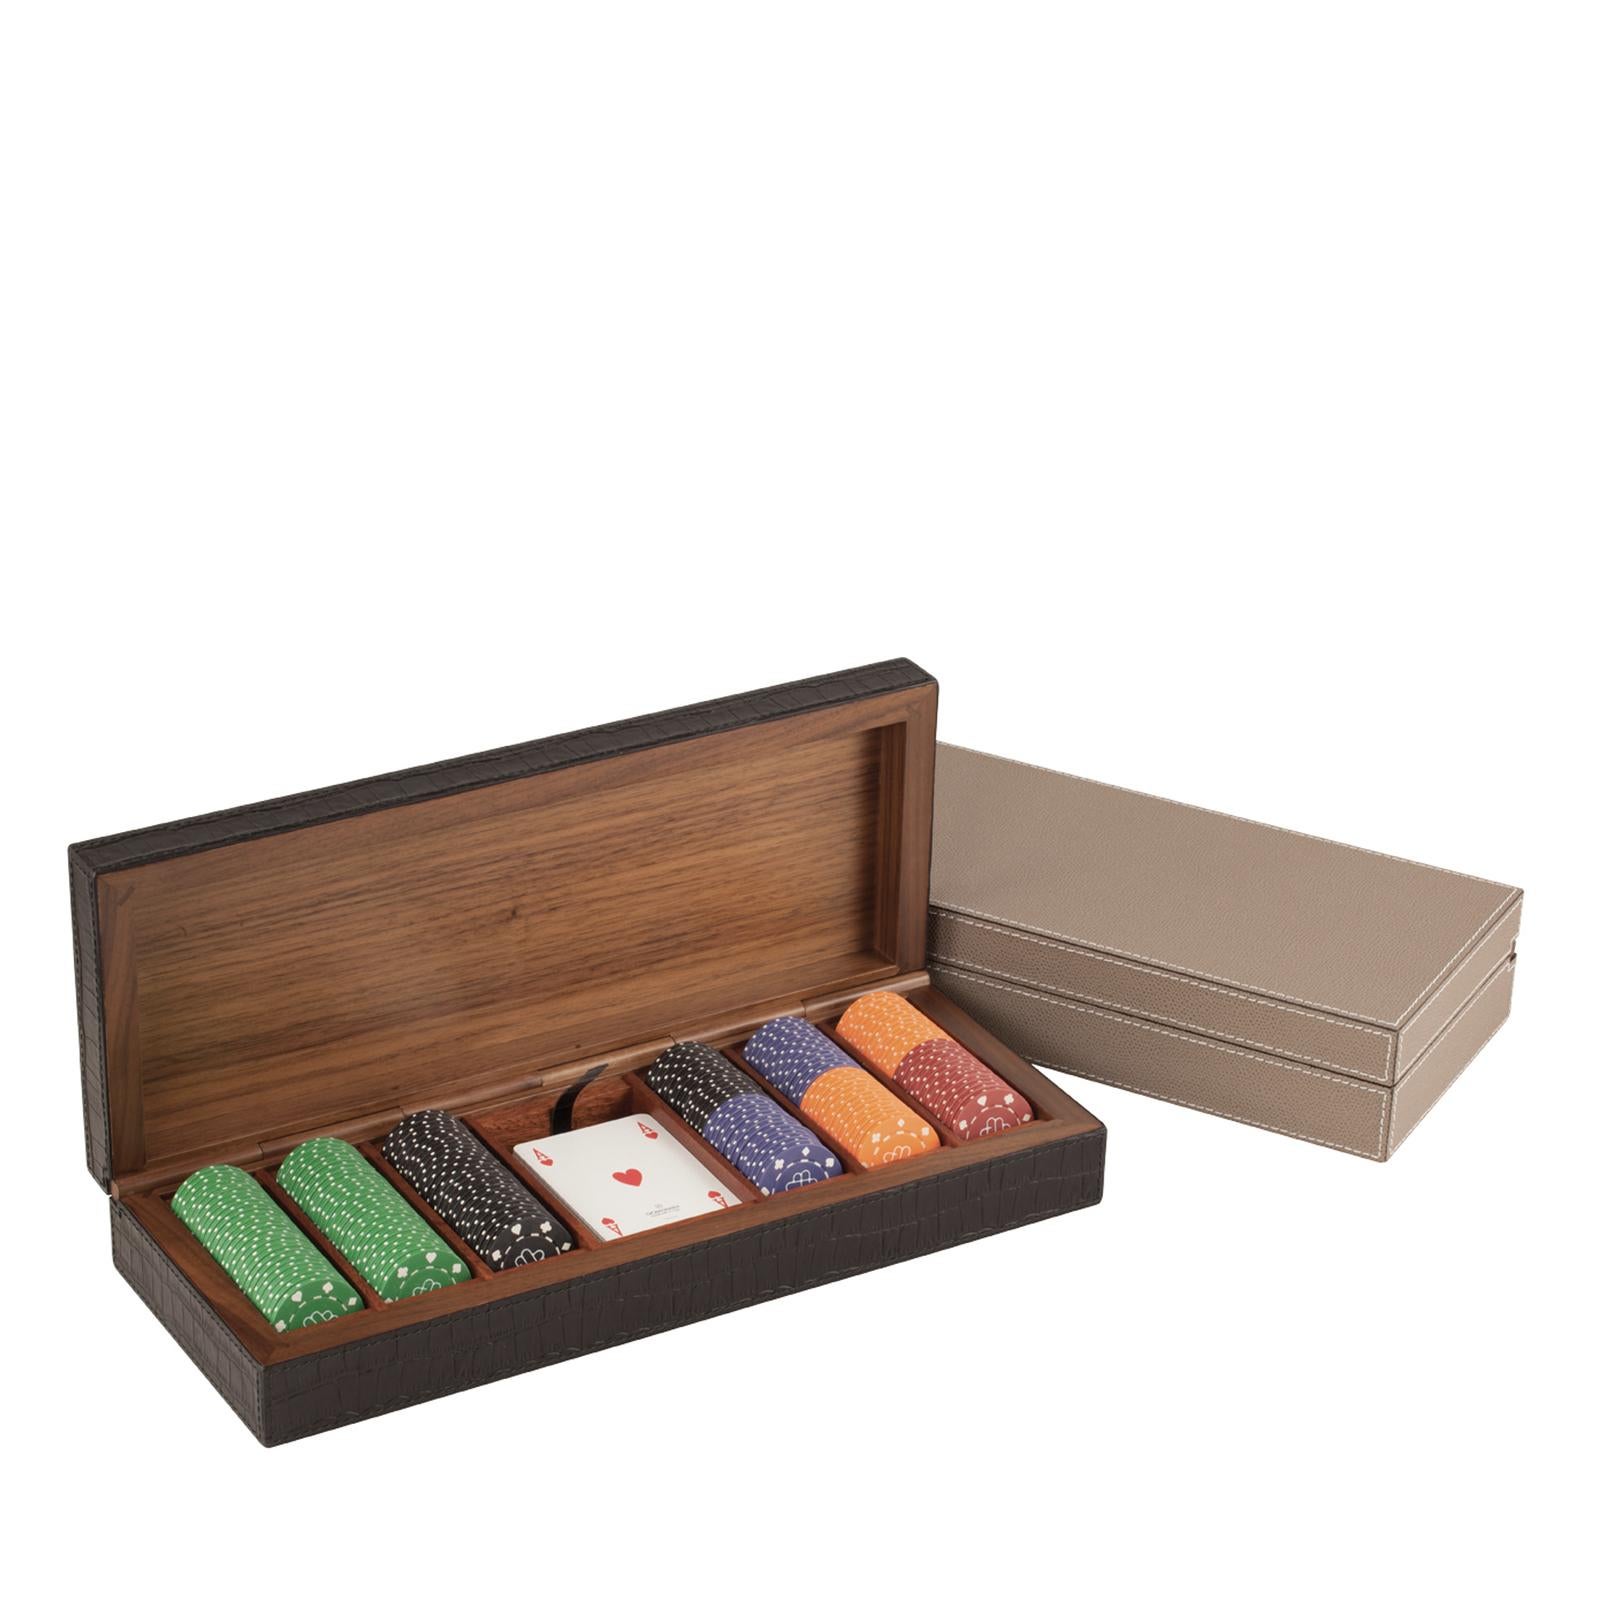 This precious companion of a card player aficionado is an exquisite work of artisanal craftsmanship. The case is in walnut wood and mahogany with special walnut wood hinges. A fine leather cover adds a touch of luxurious texture to the exterior of